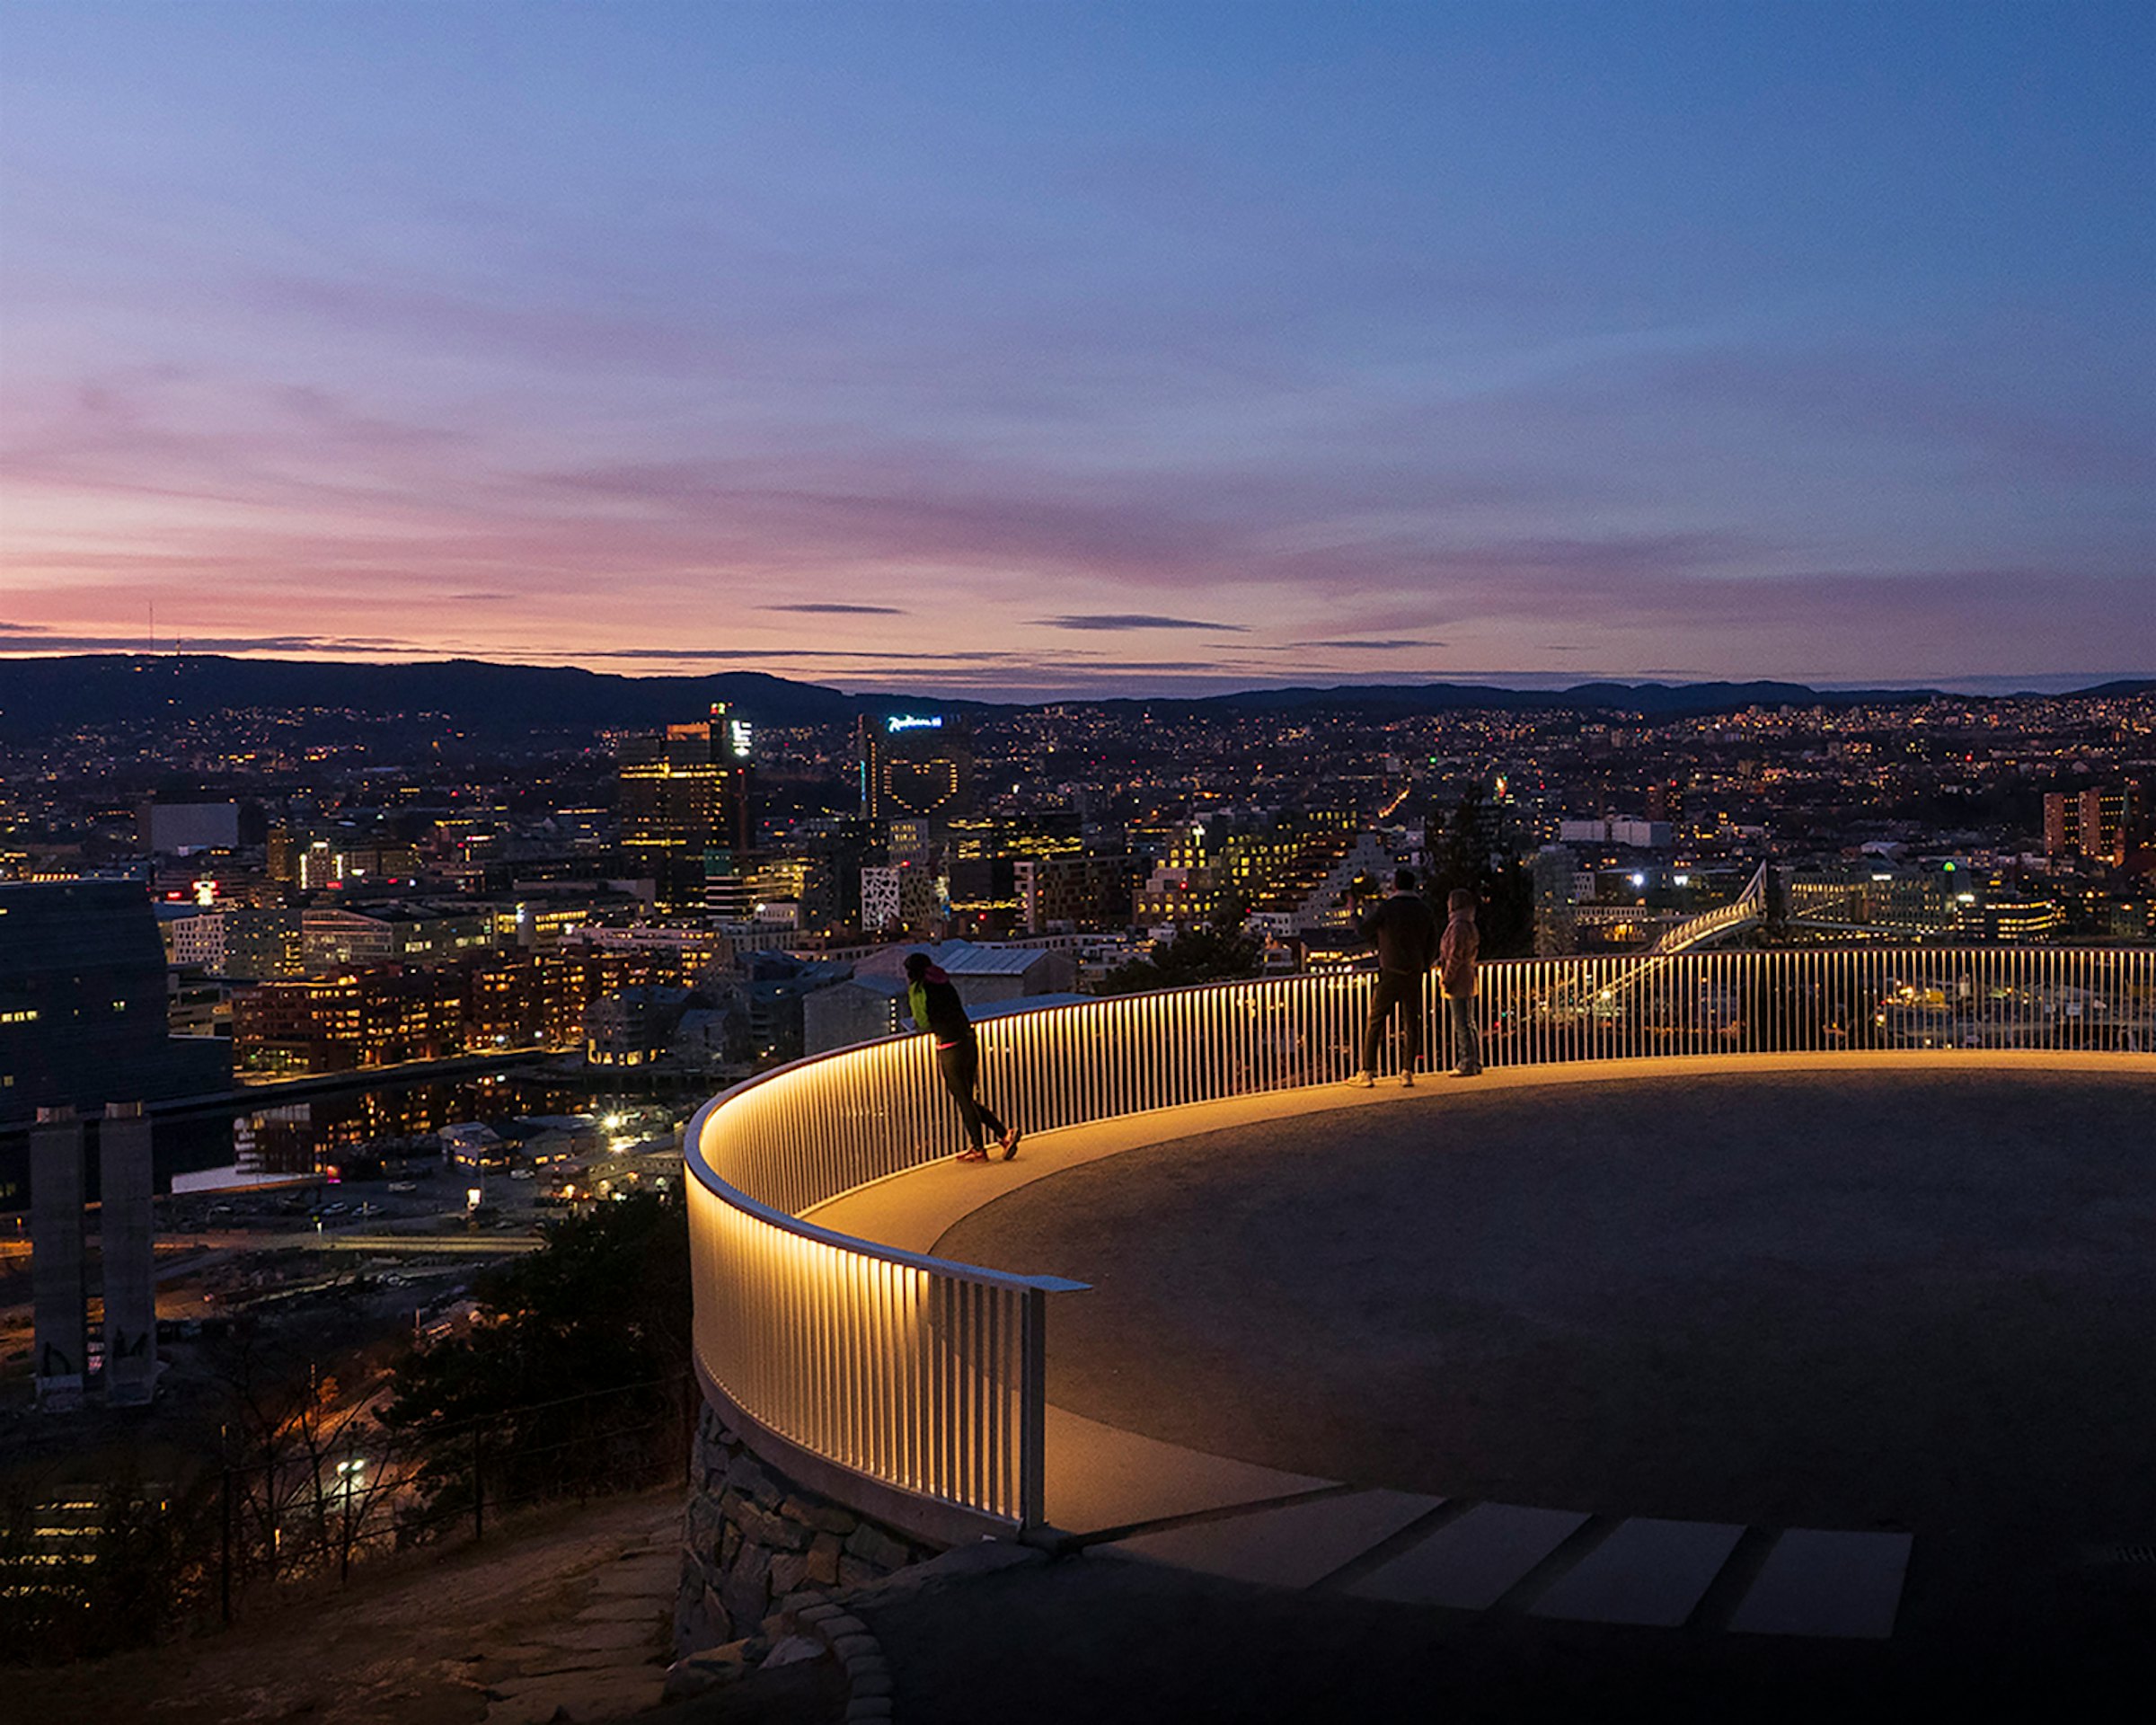 Picture of a viewpoint over Oslo at Ekebergparken at night